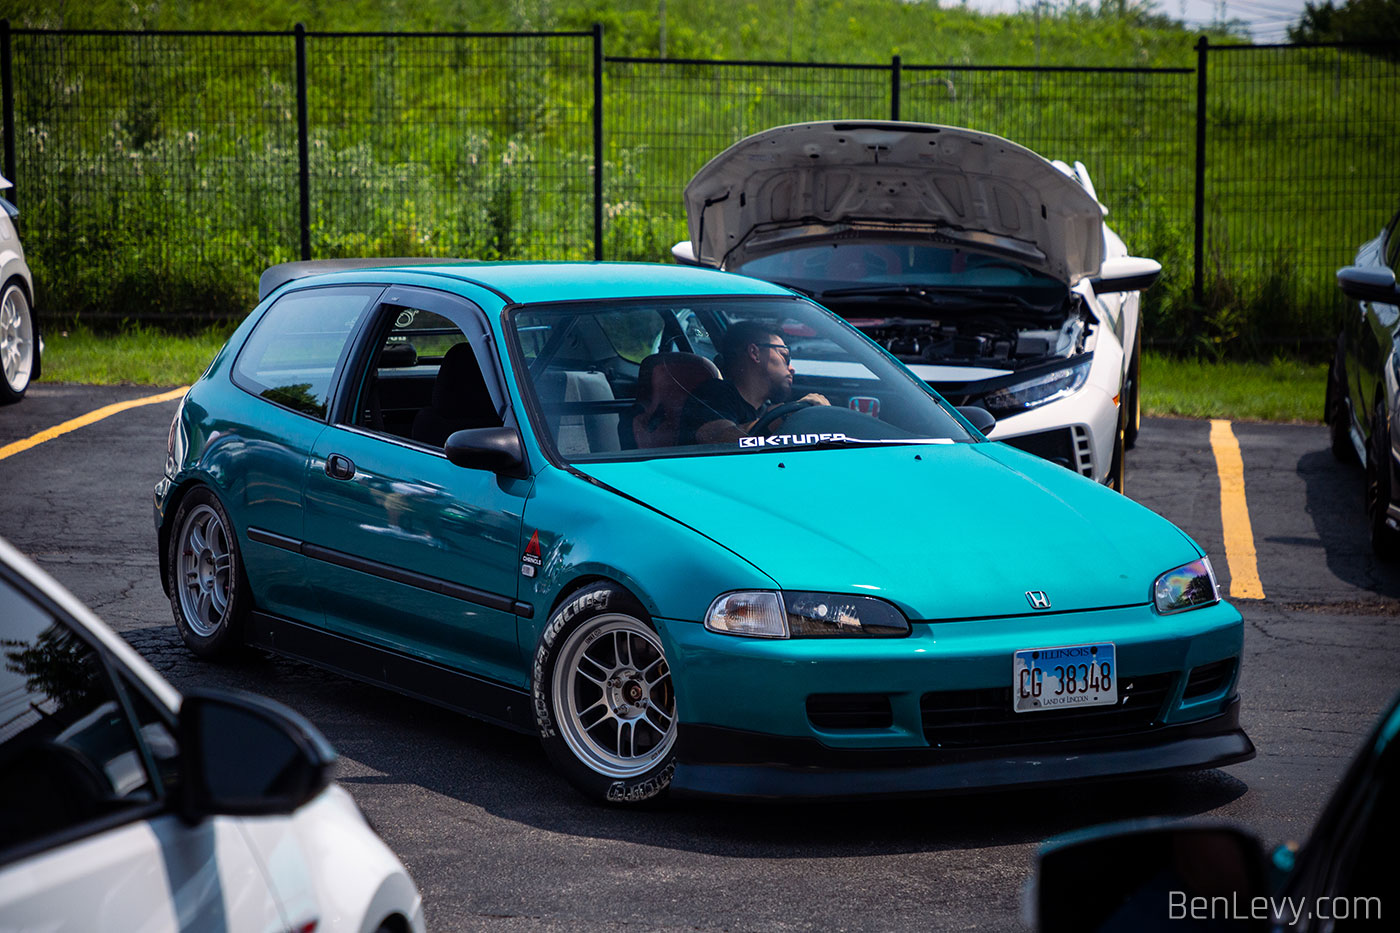 Teal EG Civic at Chicago Auto Pros Glenview